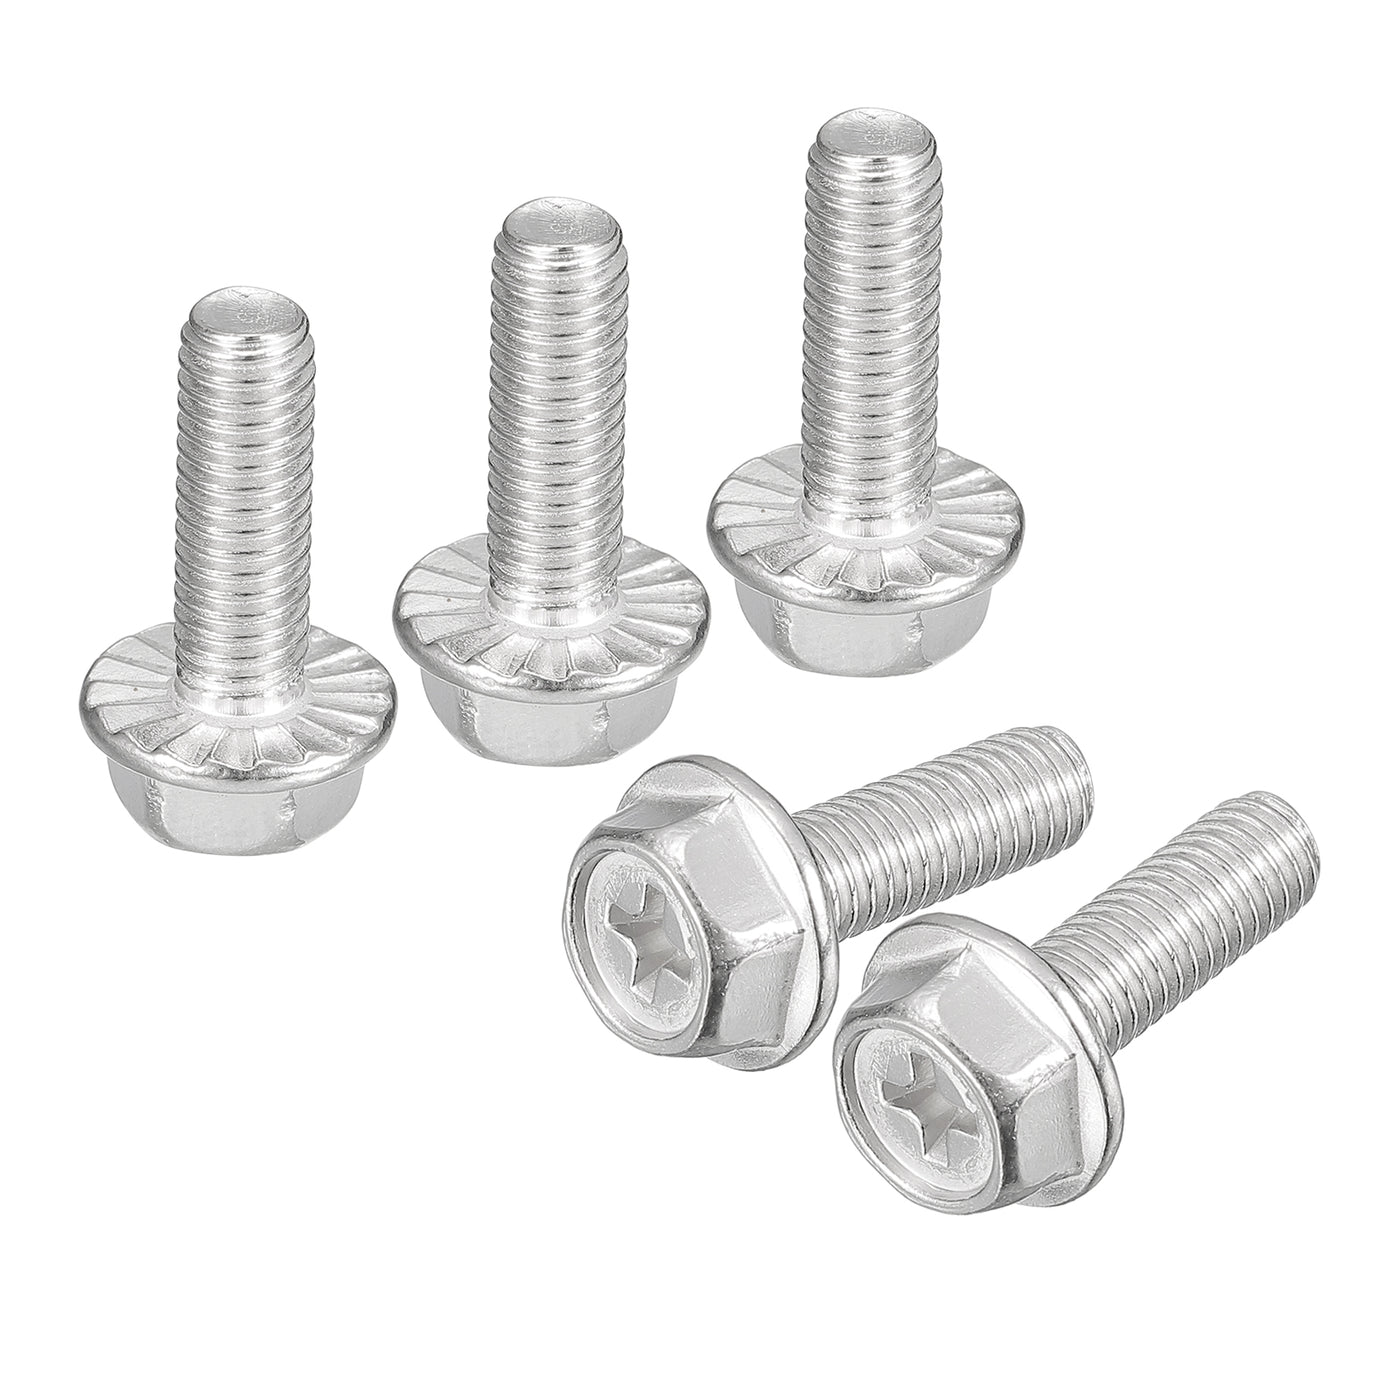 uxcell Uxcell M6x18mm Phillips Hex Head Flange Bolts, 20pcs 304 Stainless Steel Screws